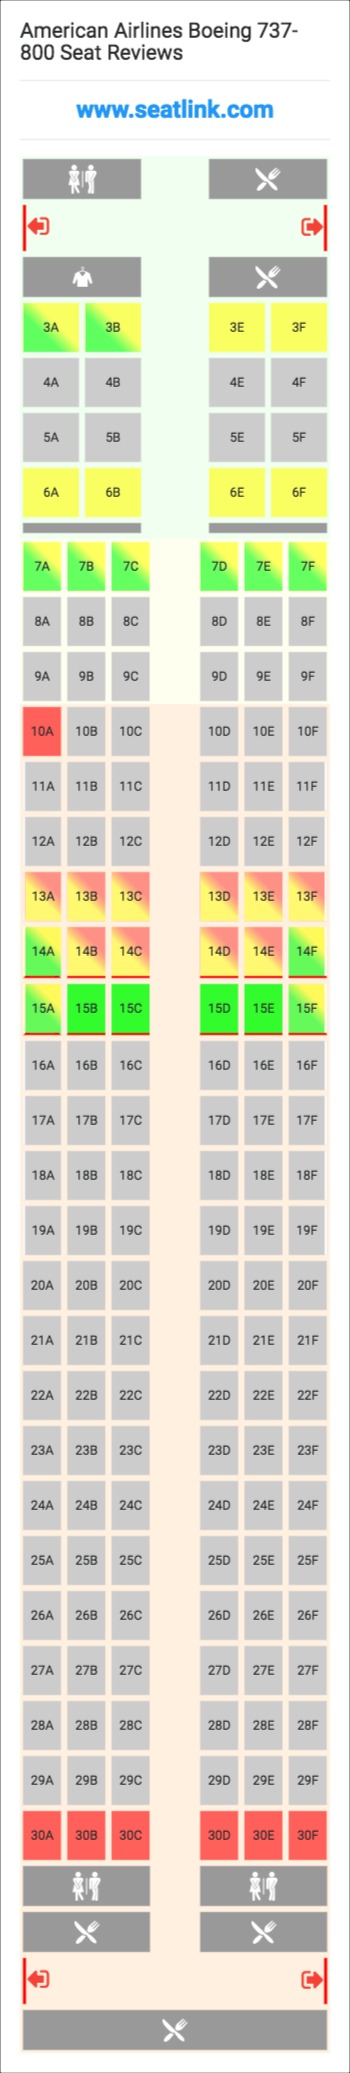 American Airlines Boeing 737-800 (738) Seat Map